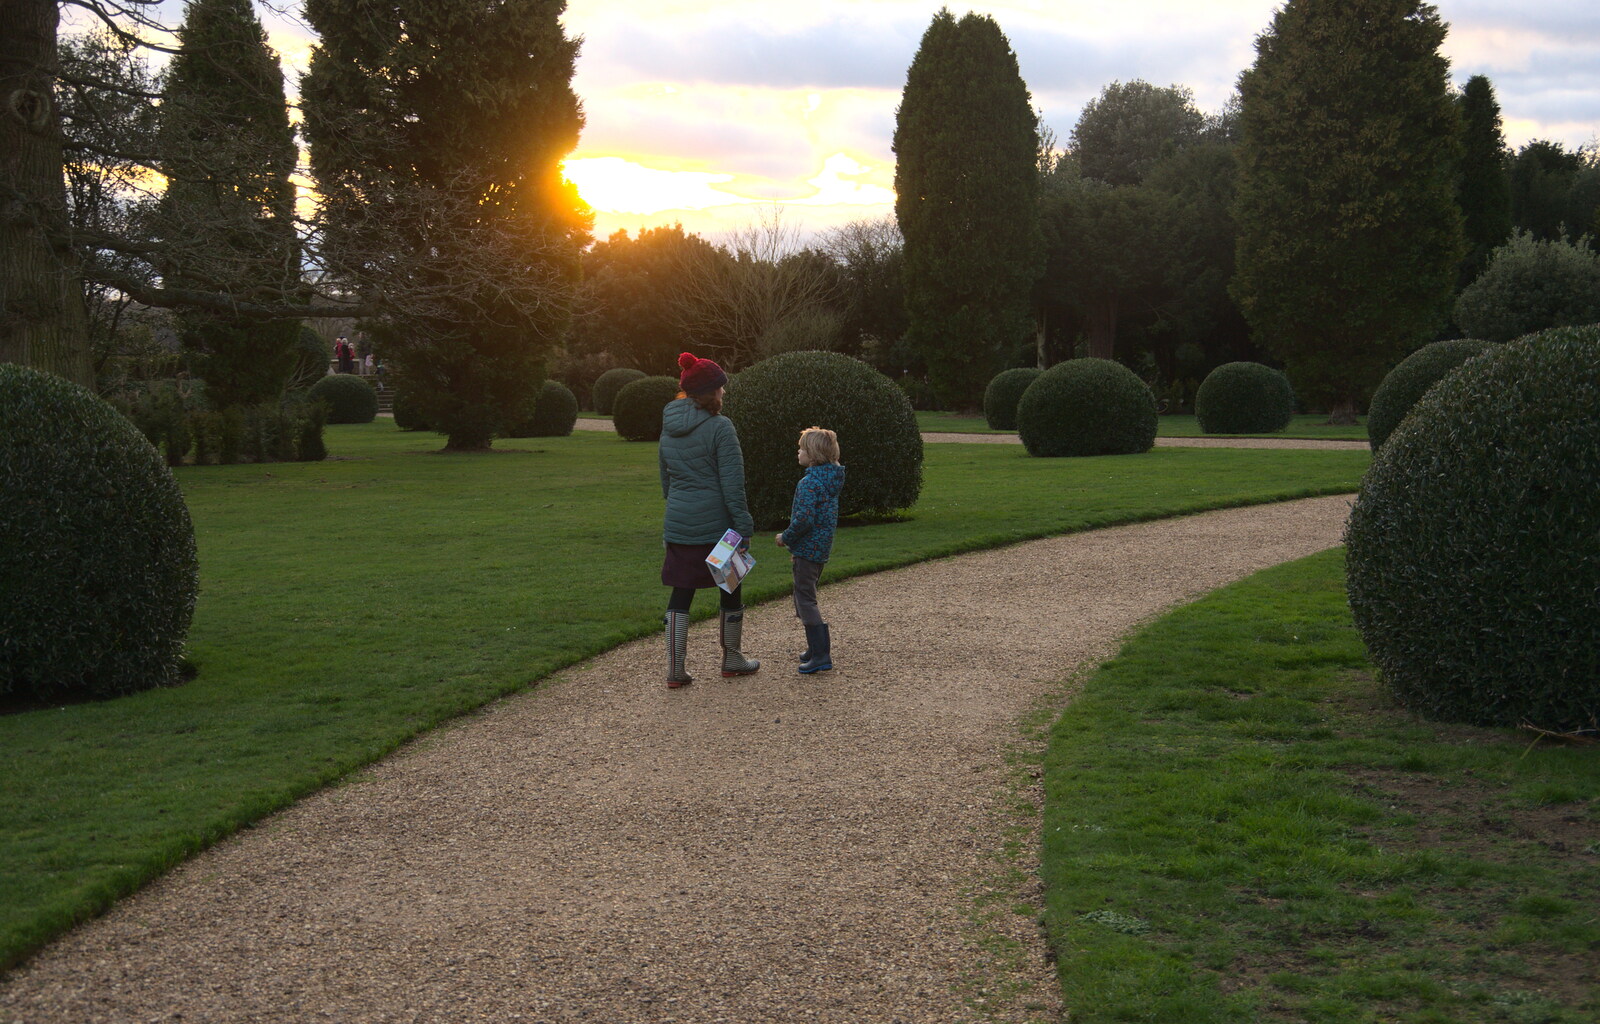 Isobel and Harry in the sunset from Ickworth House, Horringer, Suffolk - 29th December 2018